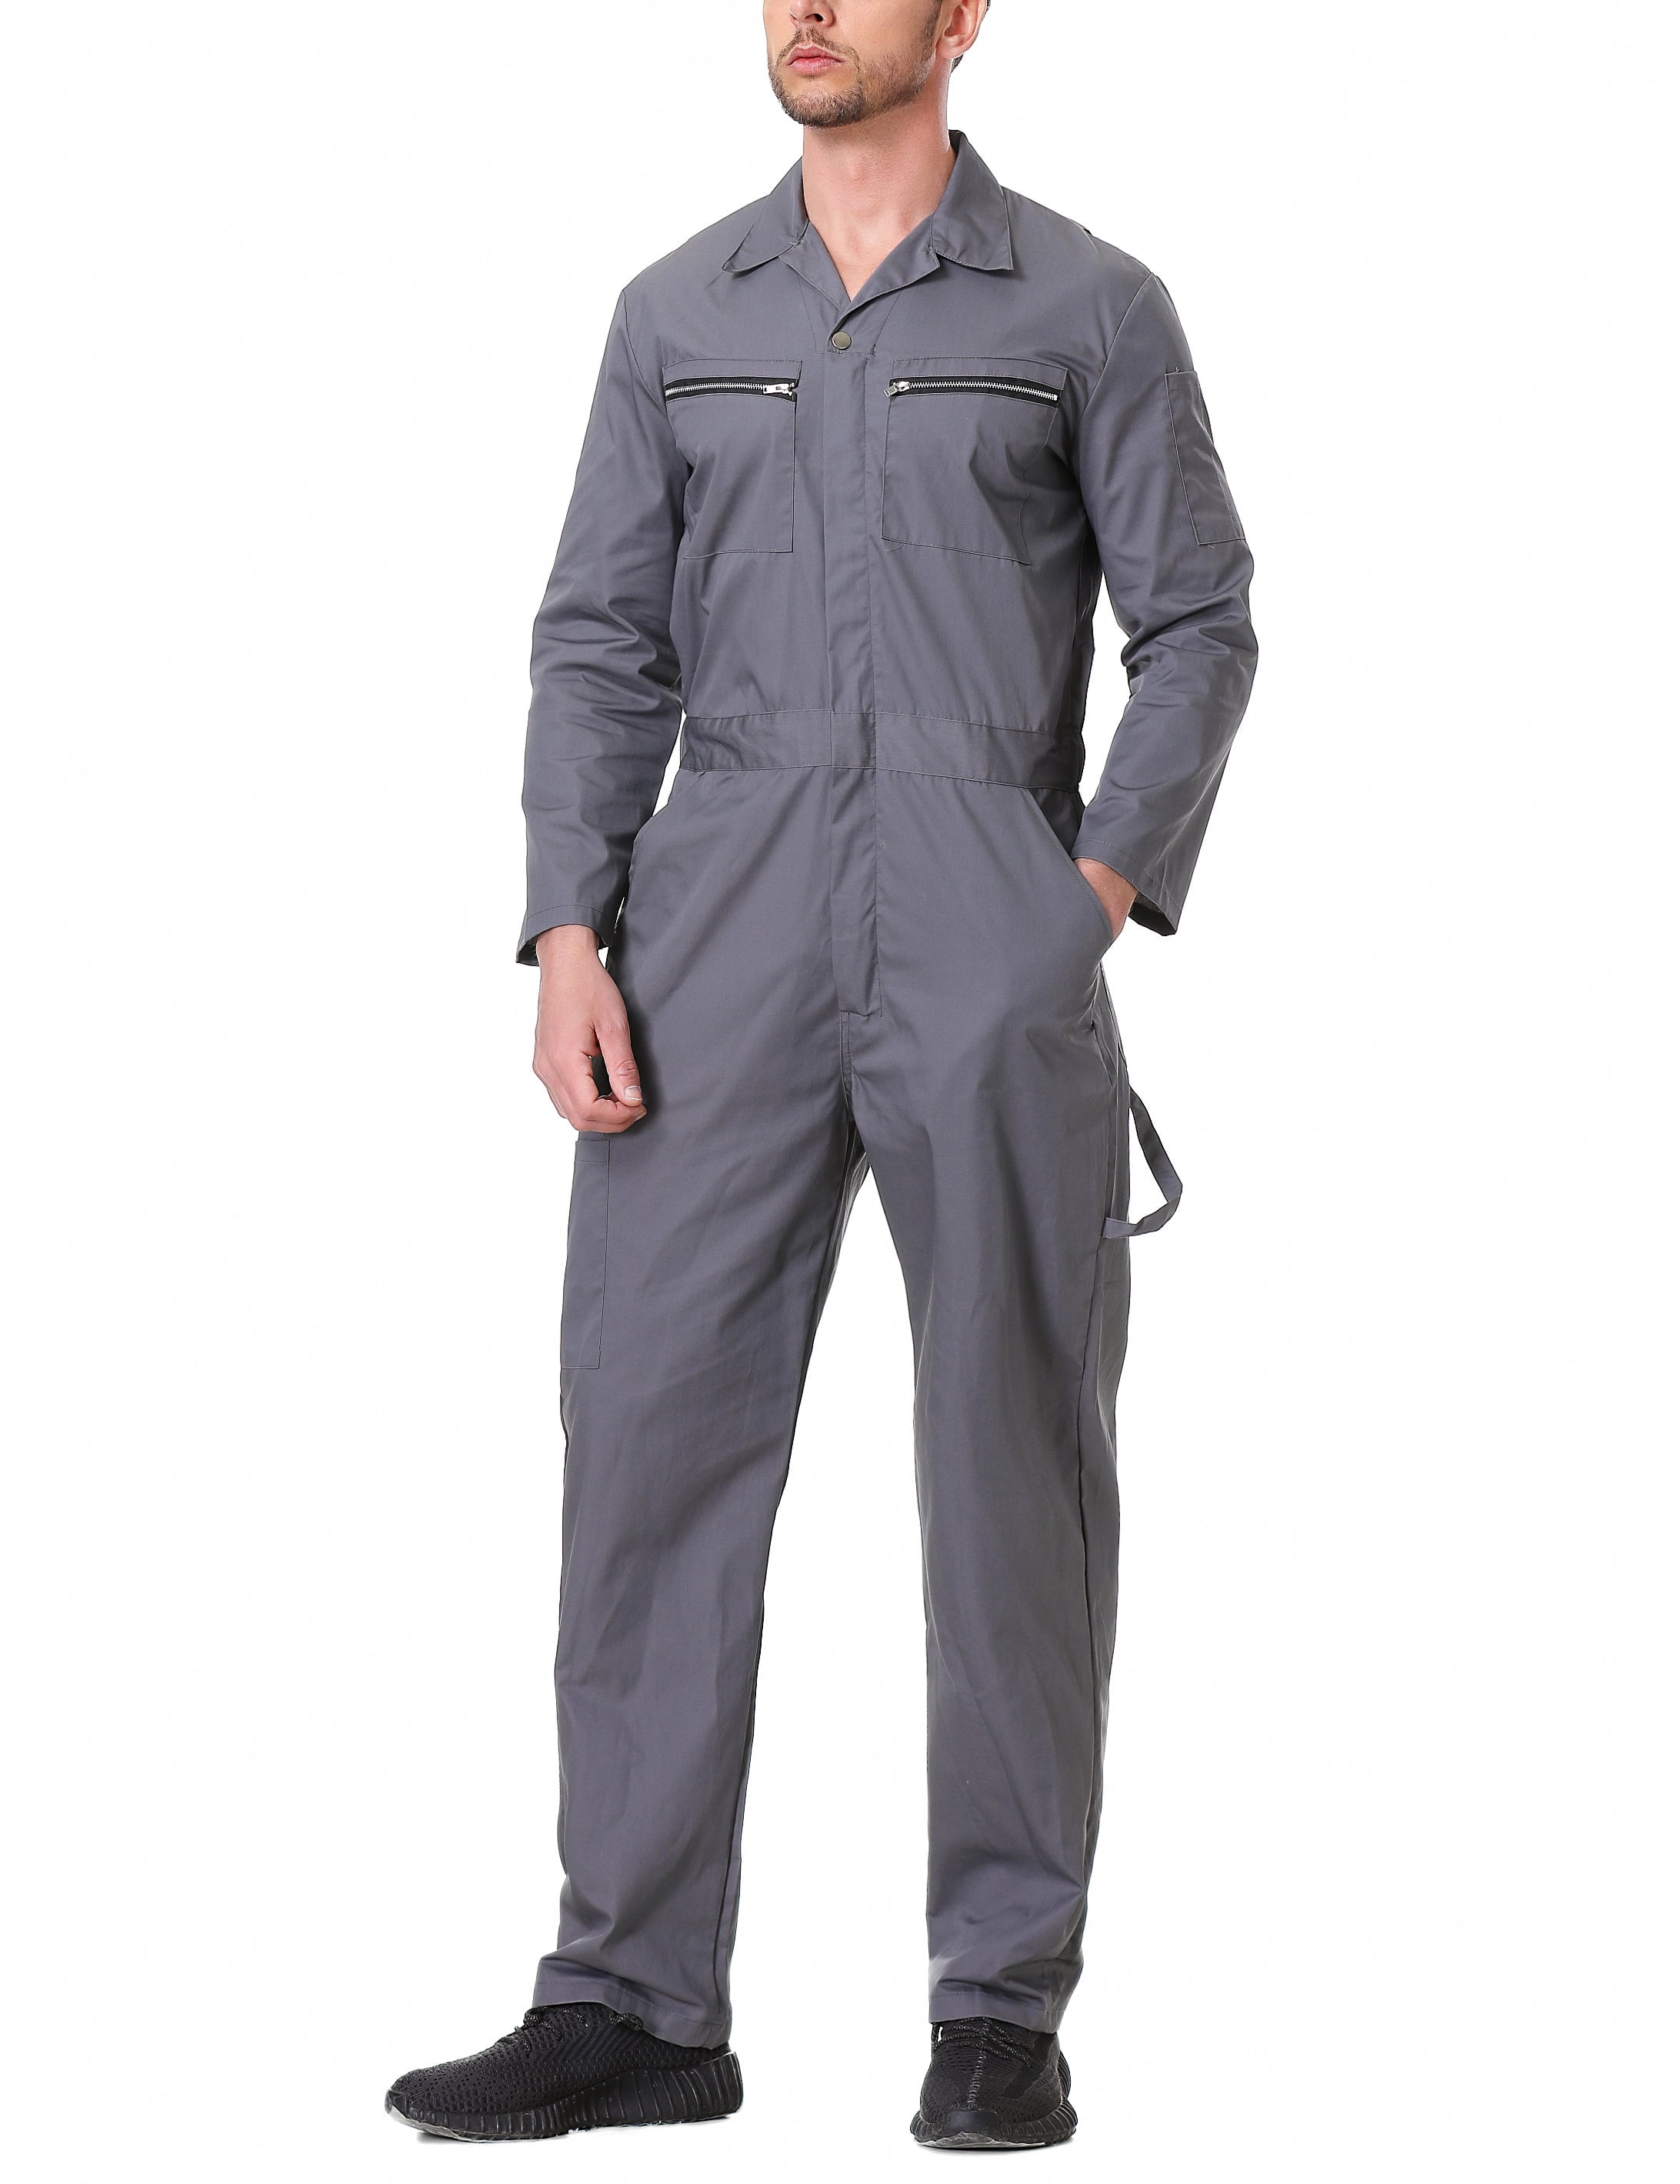 Mechanic jumpsuit Free Stock Photos, Images, and Pictures of Mechanic  jumpsuit